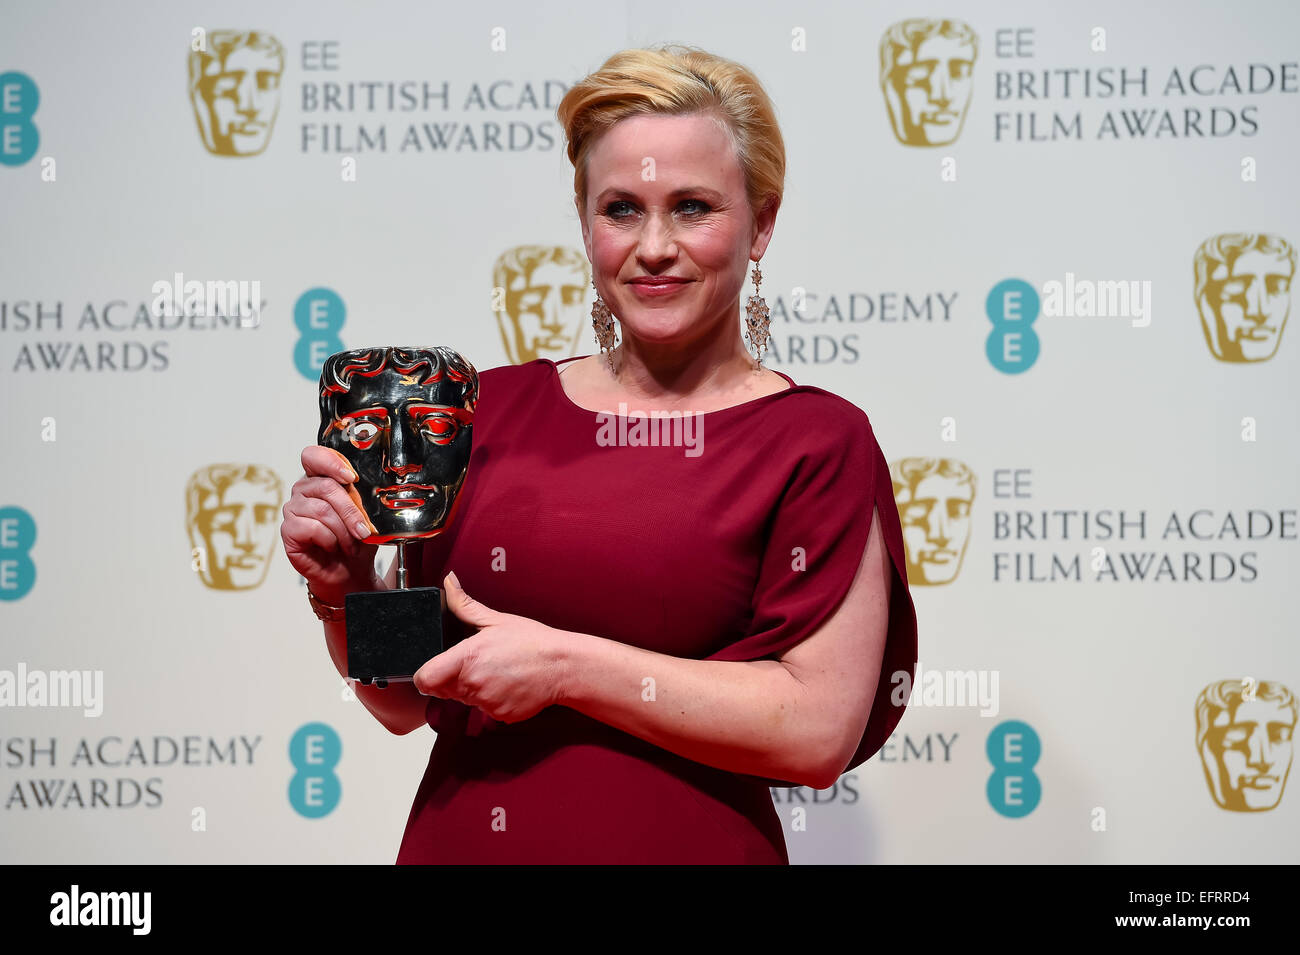 Patricia Arquette at the EE British Academy Film Awards at The Royal Opera House on February 8, 2015 in London, England. Stock Photo